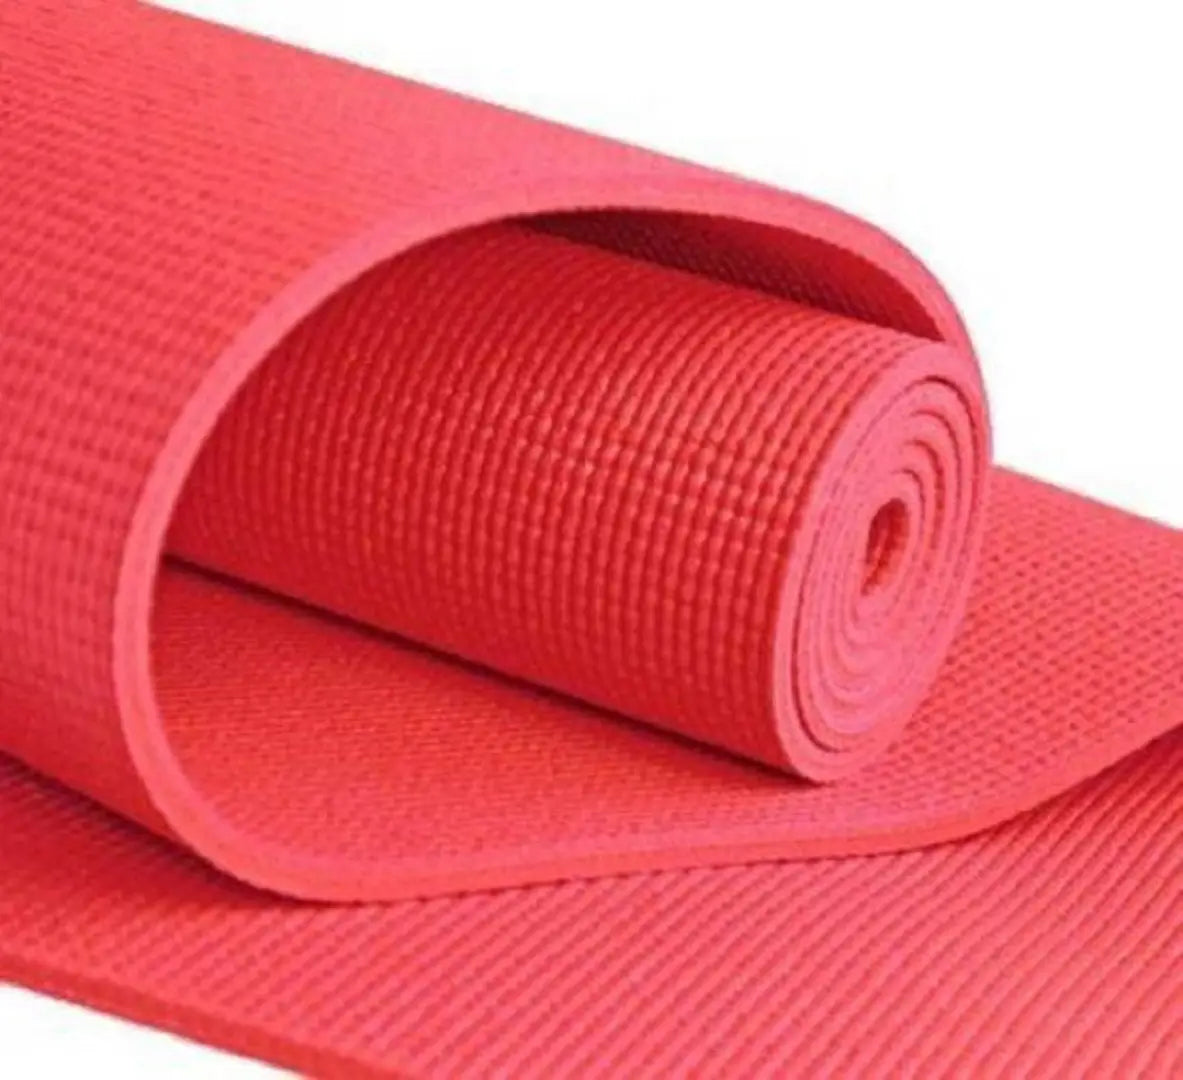 Reversible Both Side Printed Yoga Mat Daily Exercize Yoga Mat, Floor Covering Mat -  Yoga Exercize  Mat of 2x6 Feet Without Carrying Strap